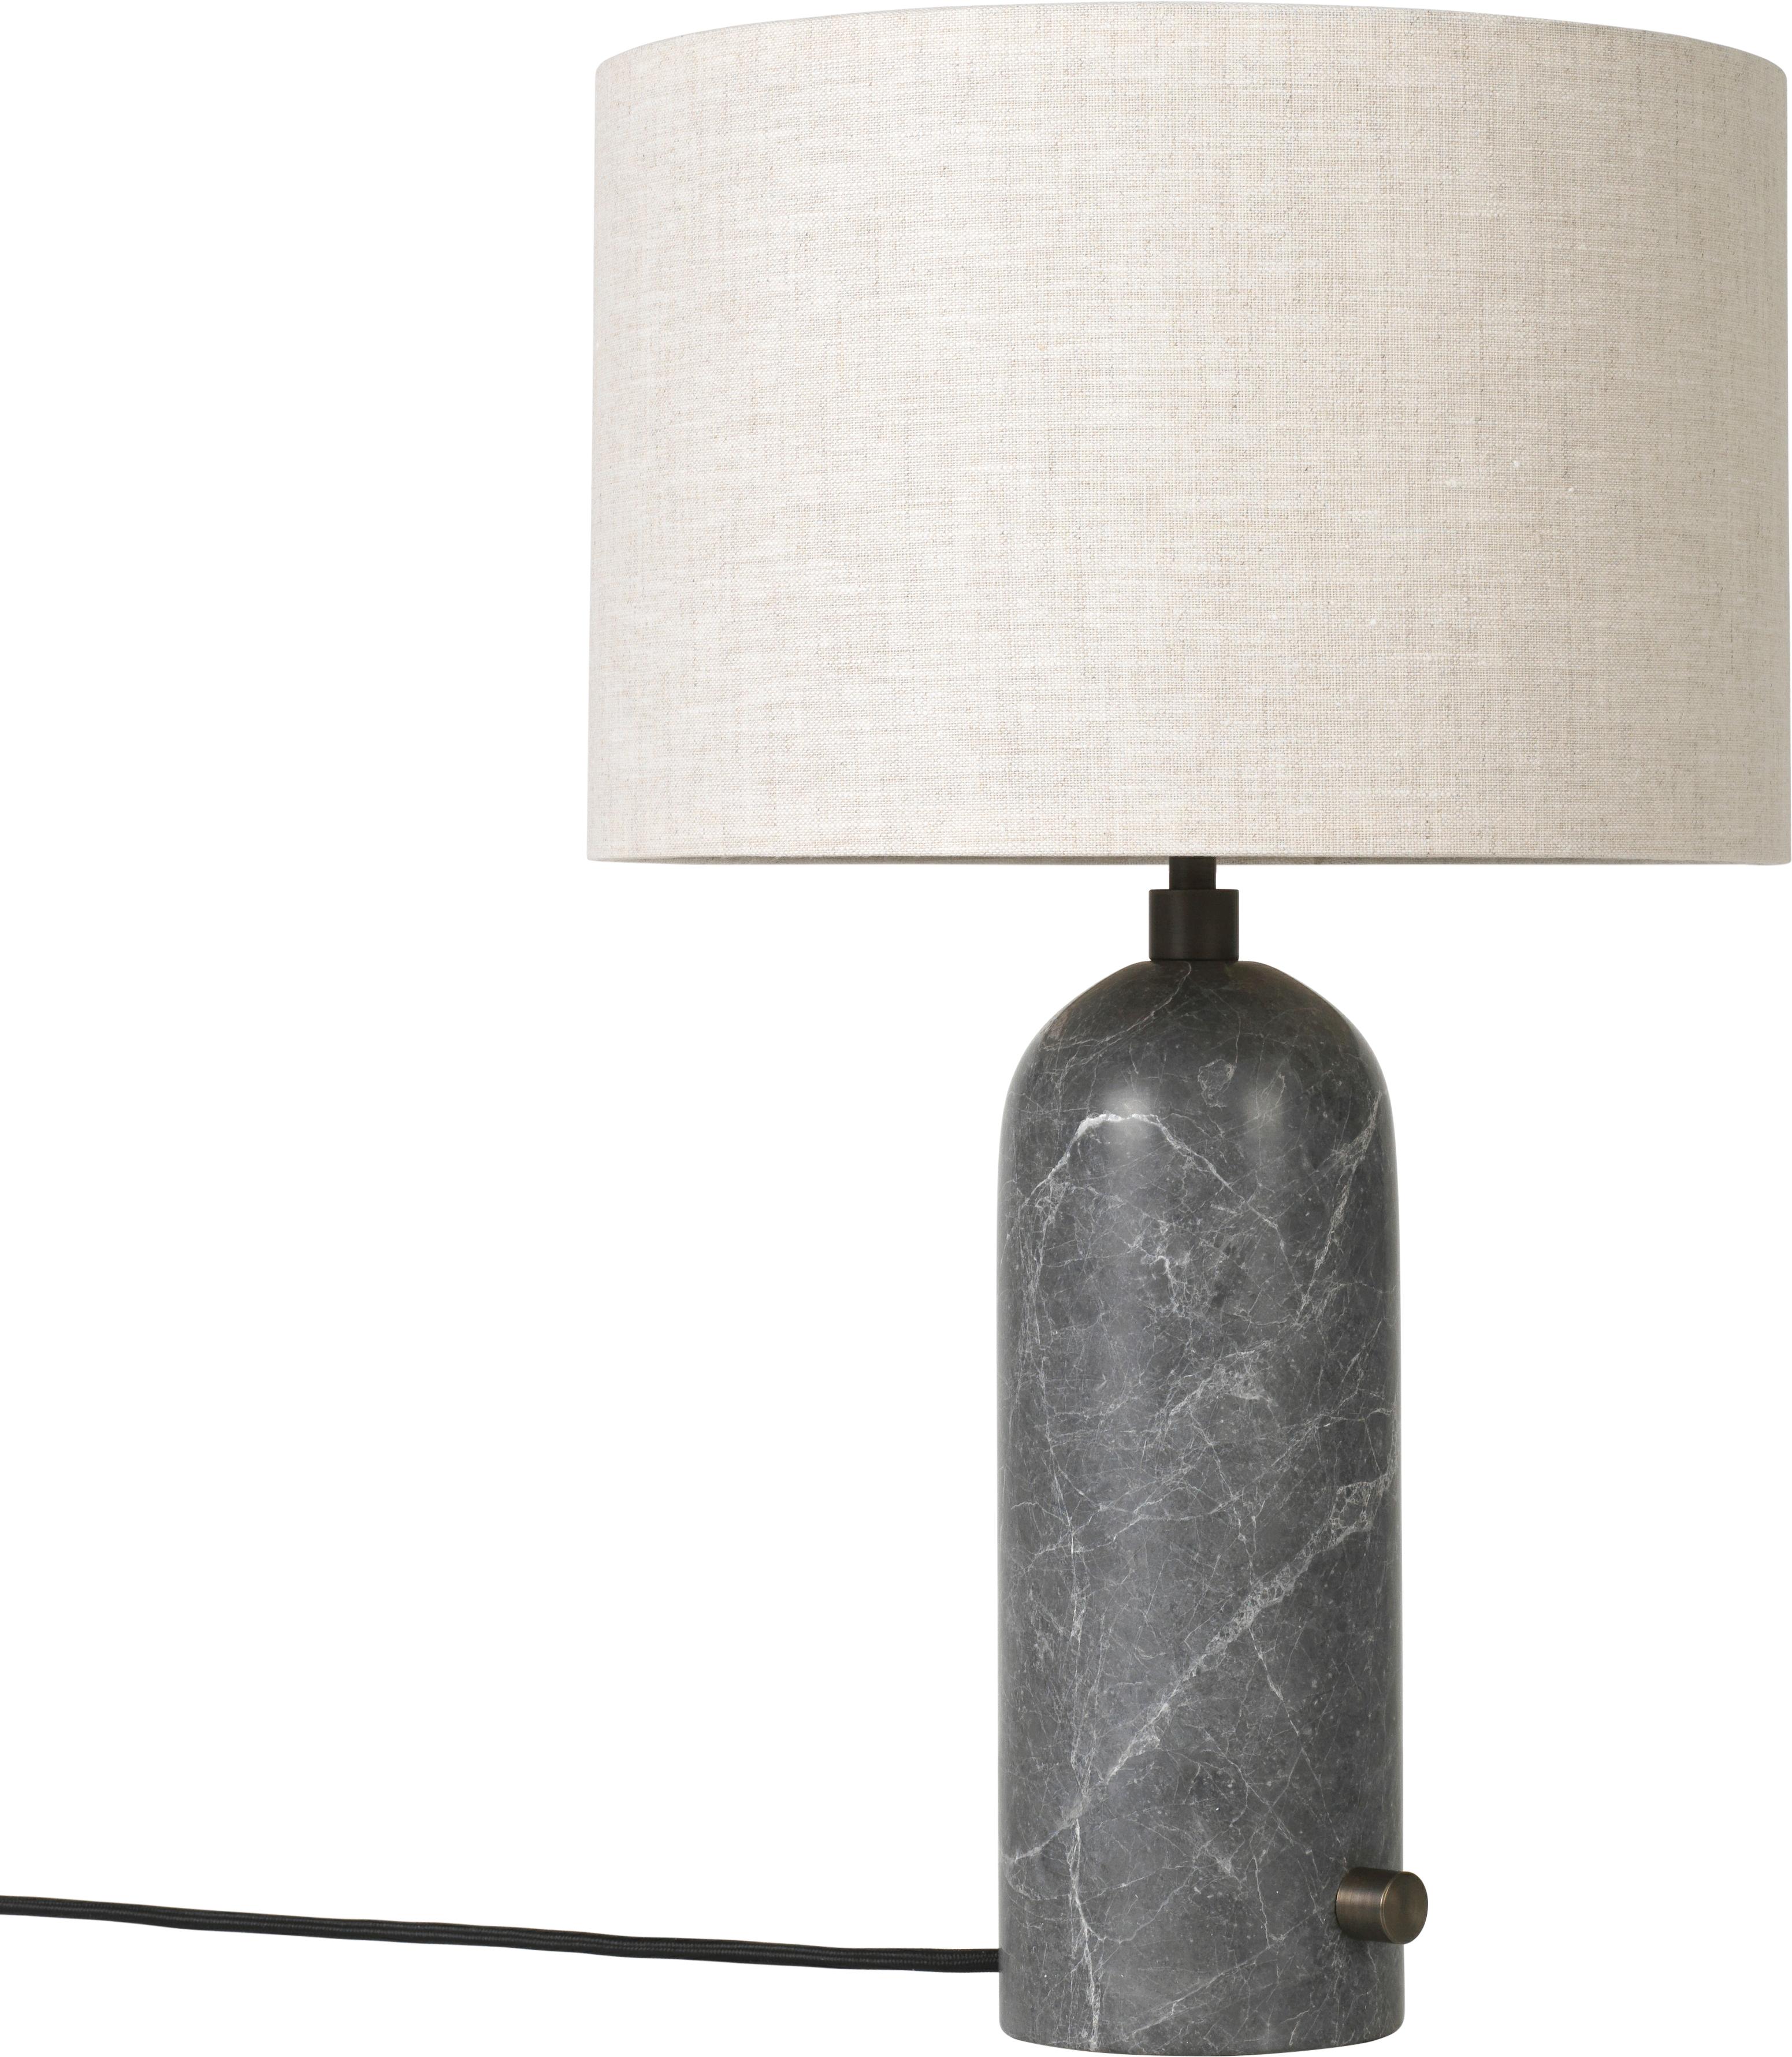 Large 'Gravity' Marble Table Lamp by Space Copenhagen for Gubi in Black For Sale 6